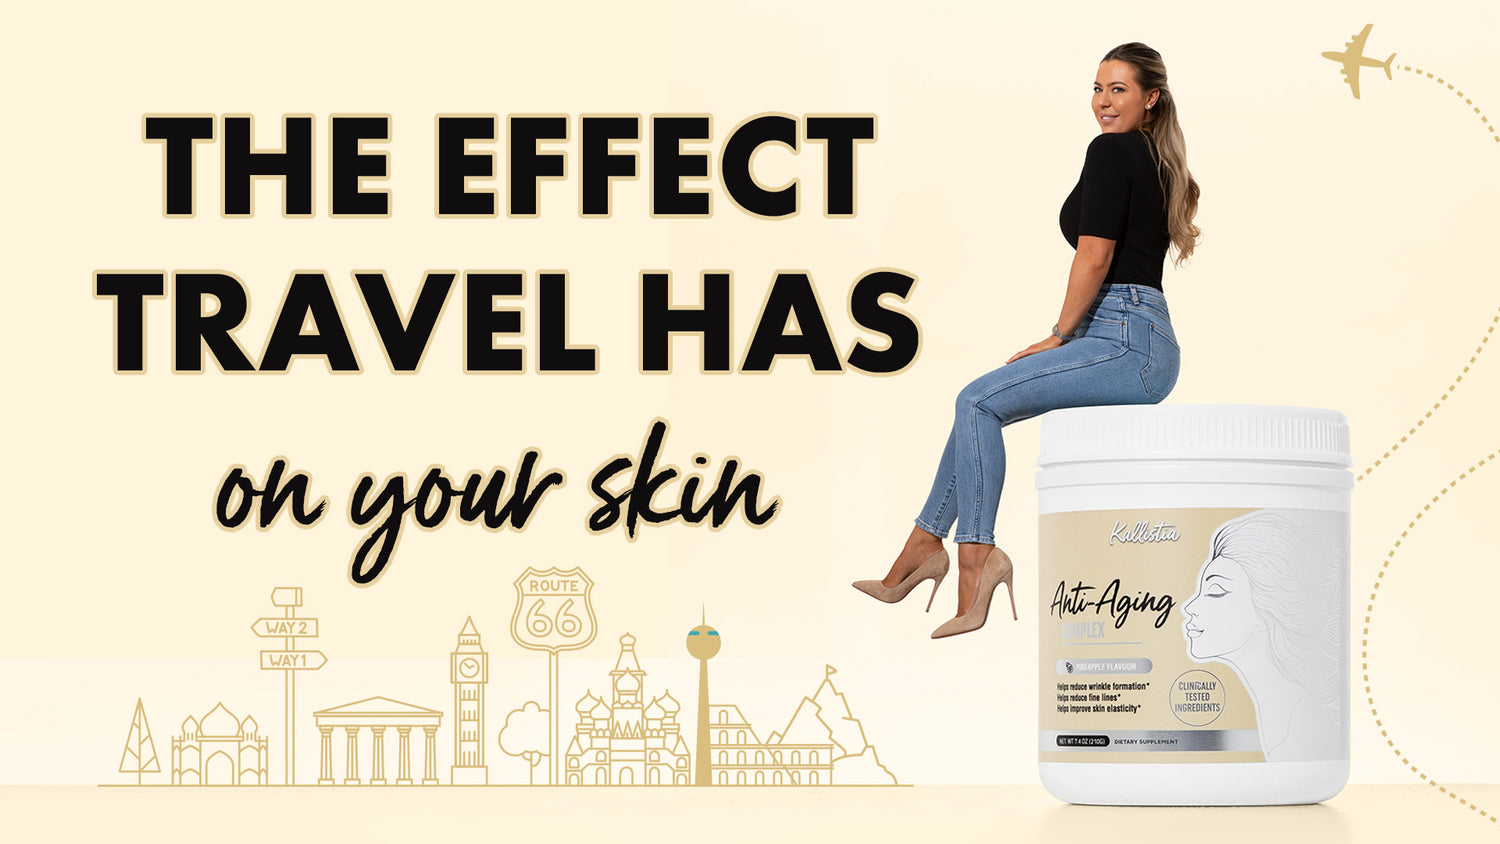 The effect travel has on your skin